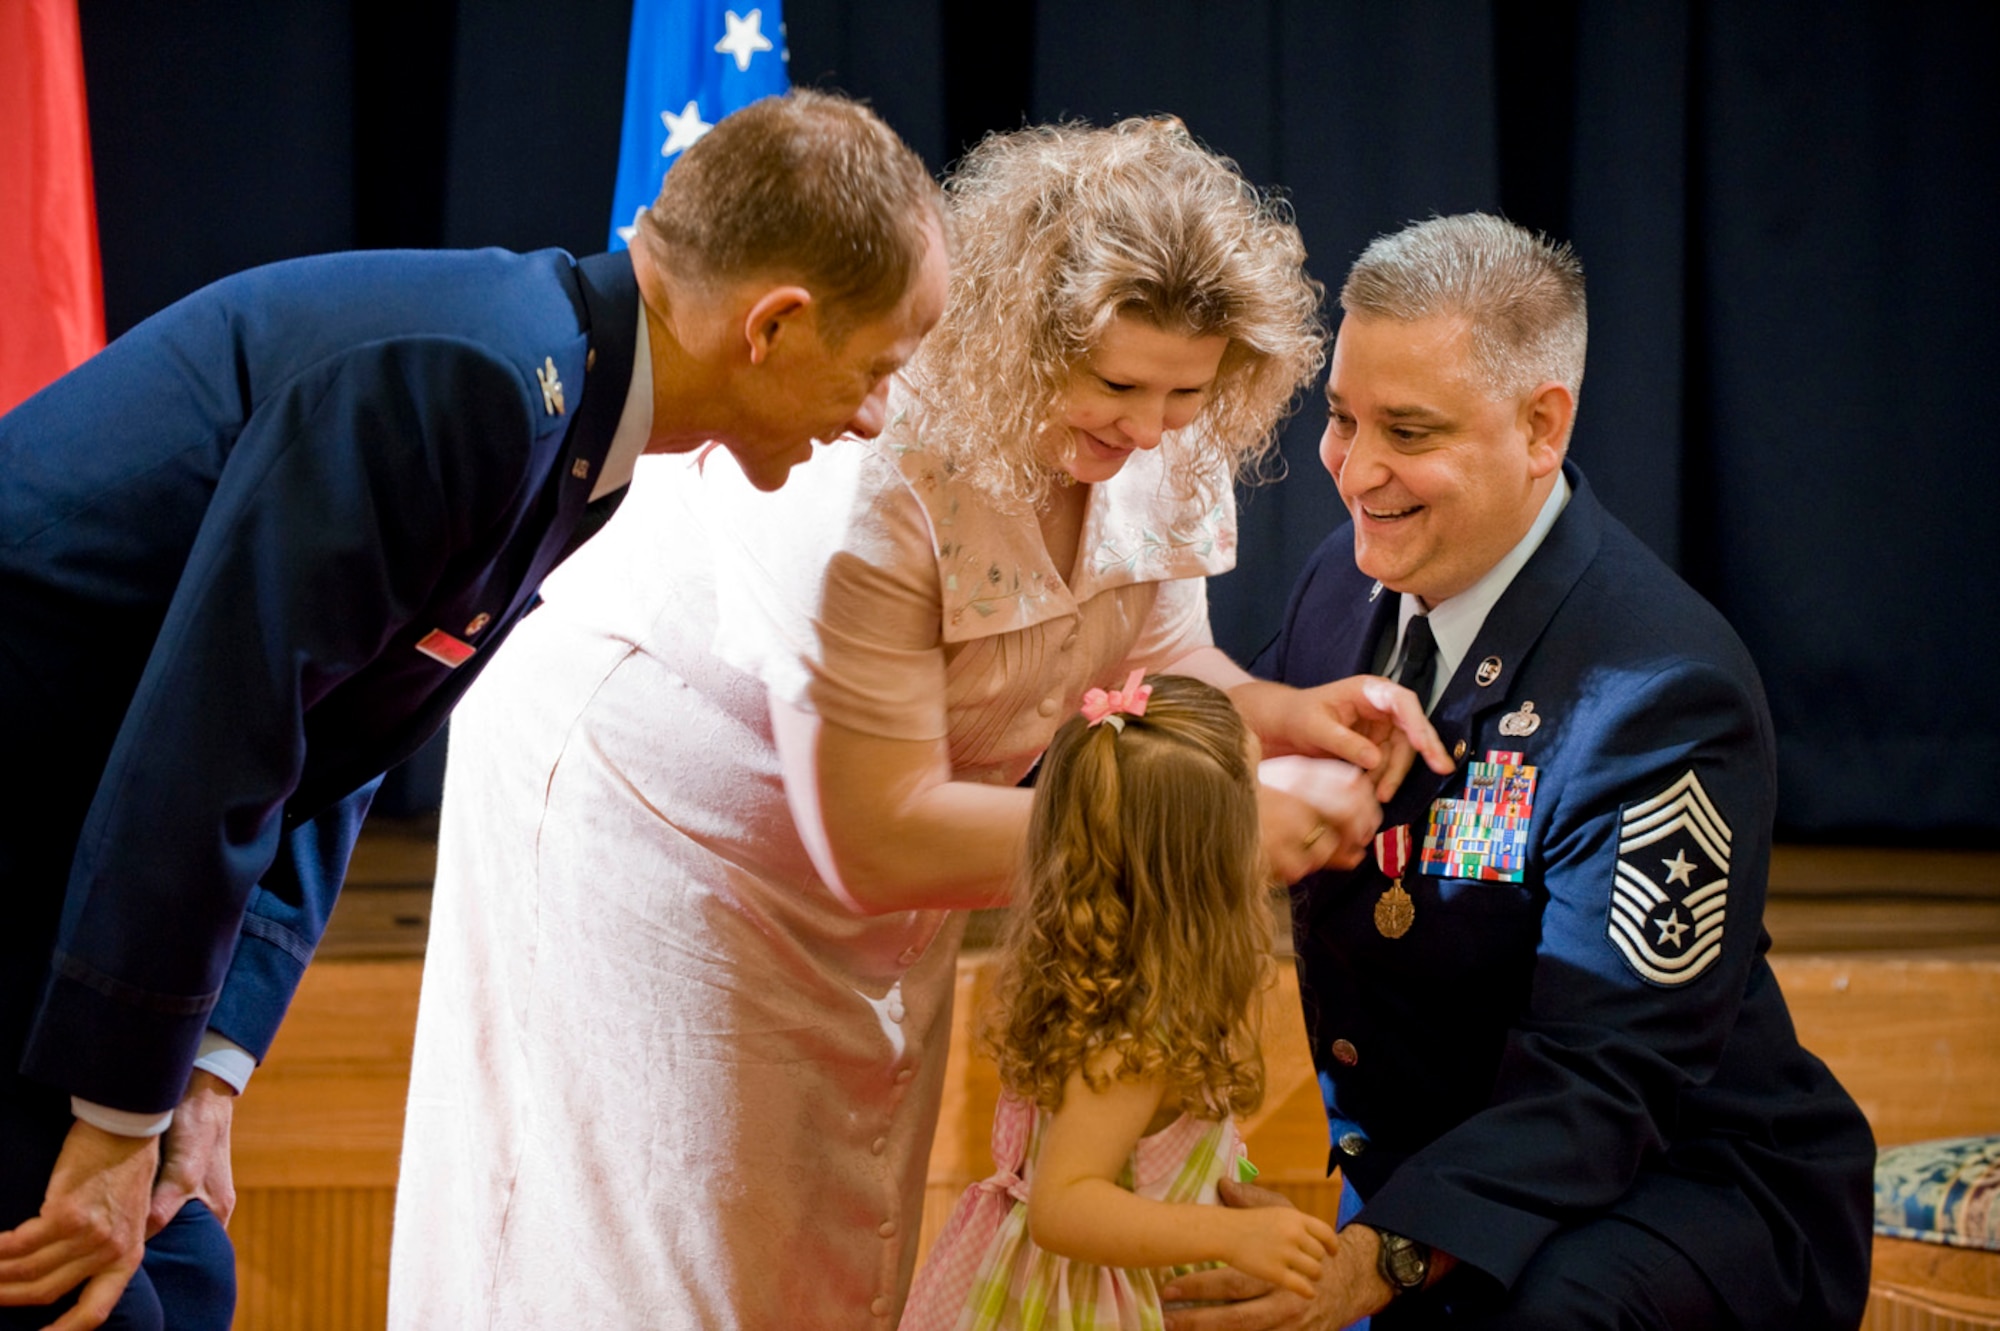 MISAWA AIR BASE, Japan -- Chief Master Sgt. Ricky Price receives a commemorative pin from his wife, Joan, and daughter, Makayla, signifying his retirement June 19, 2009. Chief Price served more than 25 years on active duty, finishing his career as command chief master sergeant, 35th Fighter Wing. (U.S. Air Force photo by Staff Sgt. Samuel Morse)